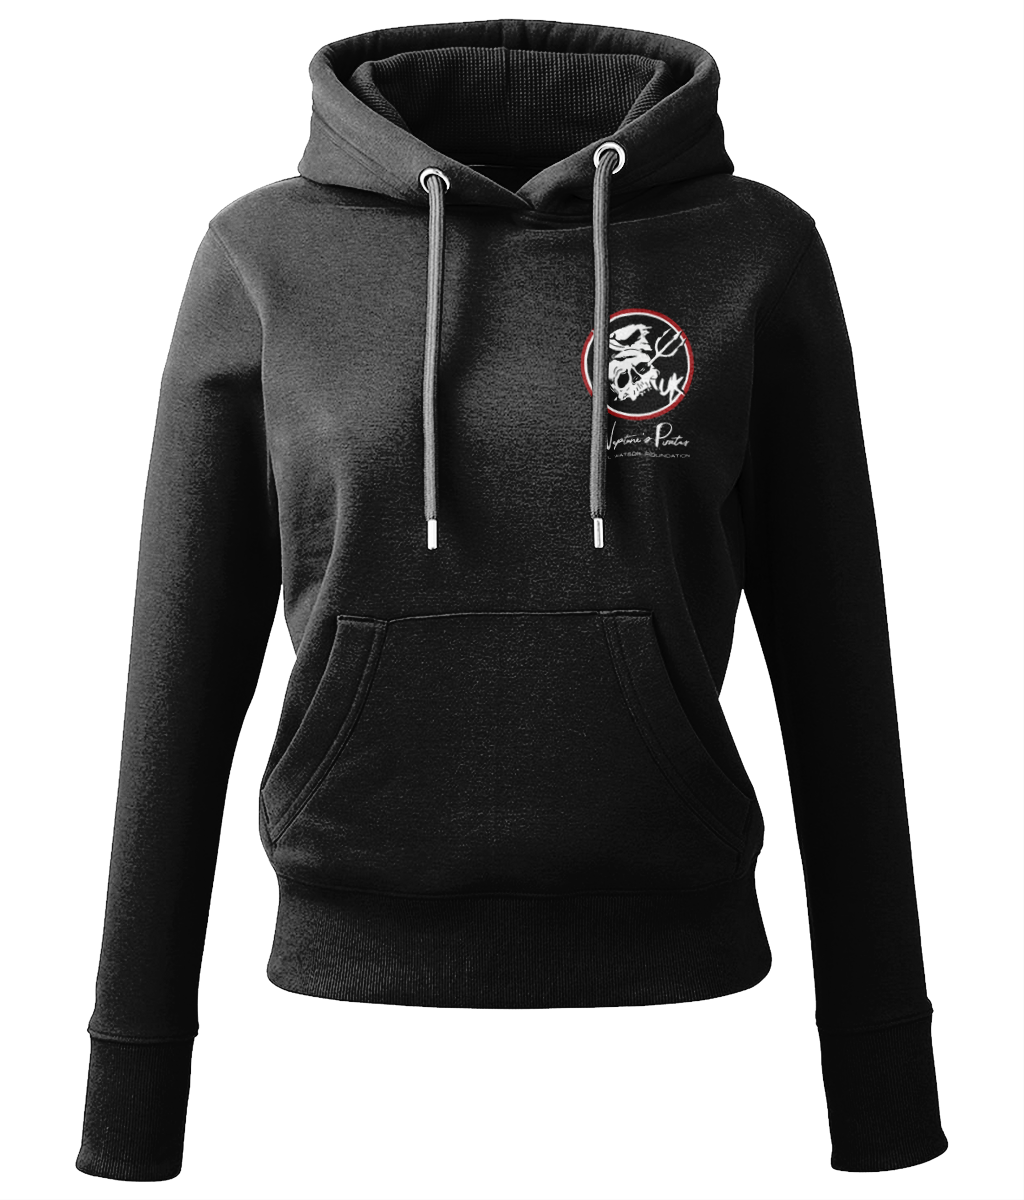 Neptune's Pirates Women's Pullover Hoodie - Captain Paul Watson Foundation (t/a Neptune's Pirates)